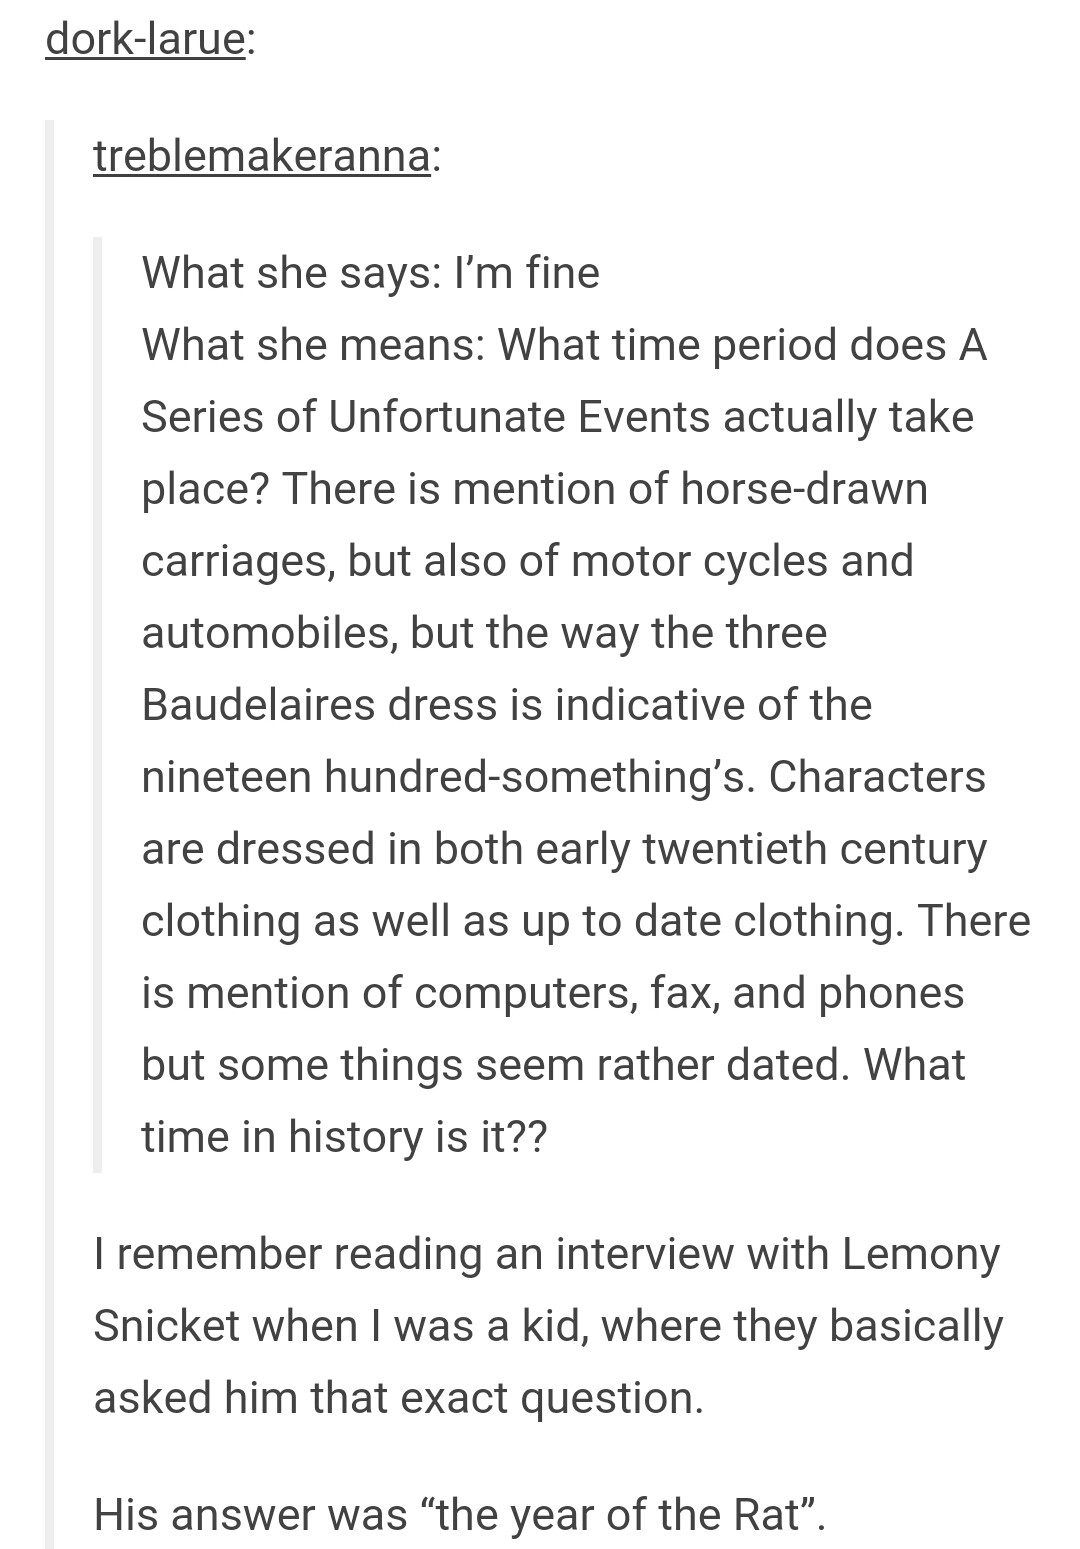 series of unfortunate events tumblr posts - dorklarue treblemakeranna What she says I'm fine What she means What time period does A Series of Unfortunate Events actually take place? There is mention of horsedrawn carriages, but also of motor cycles and au